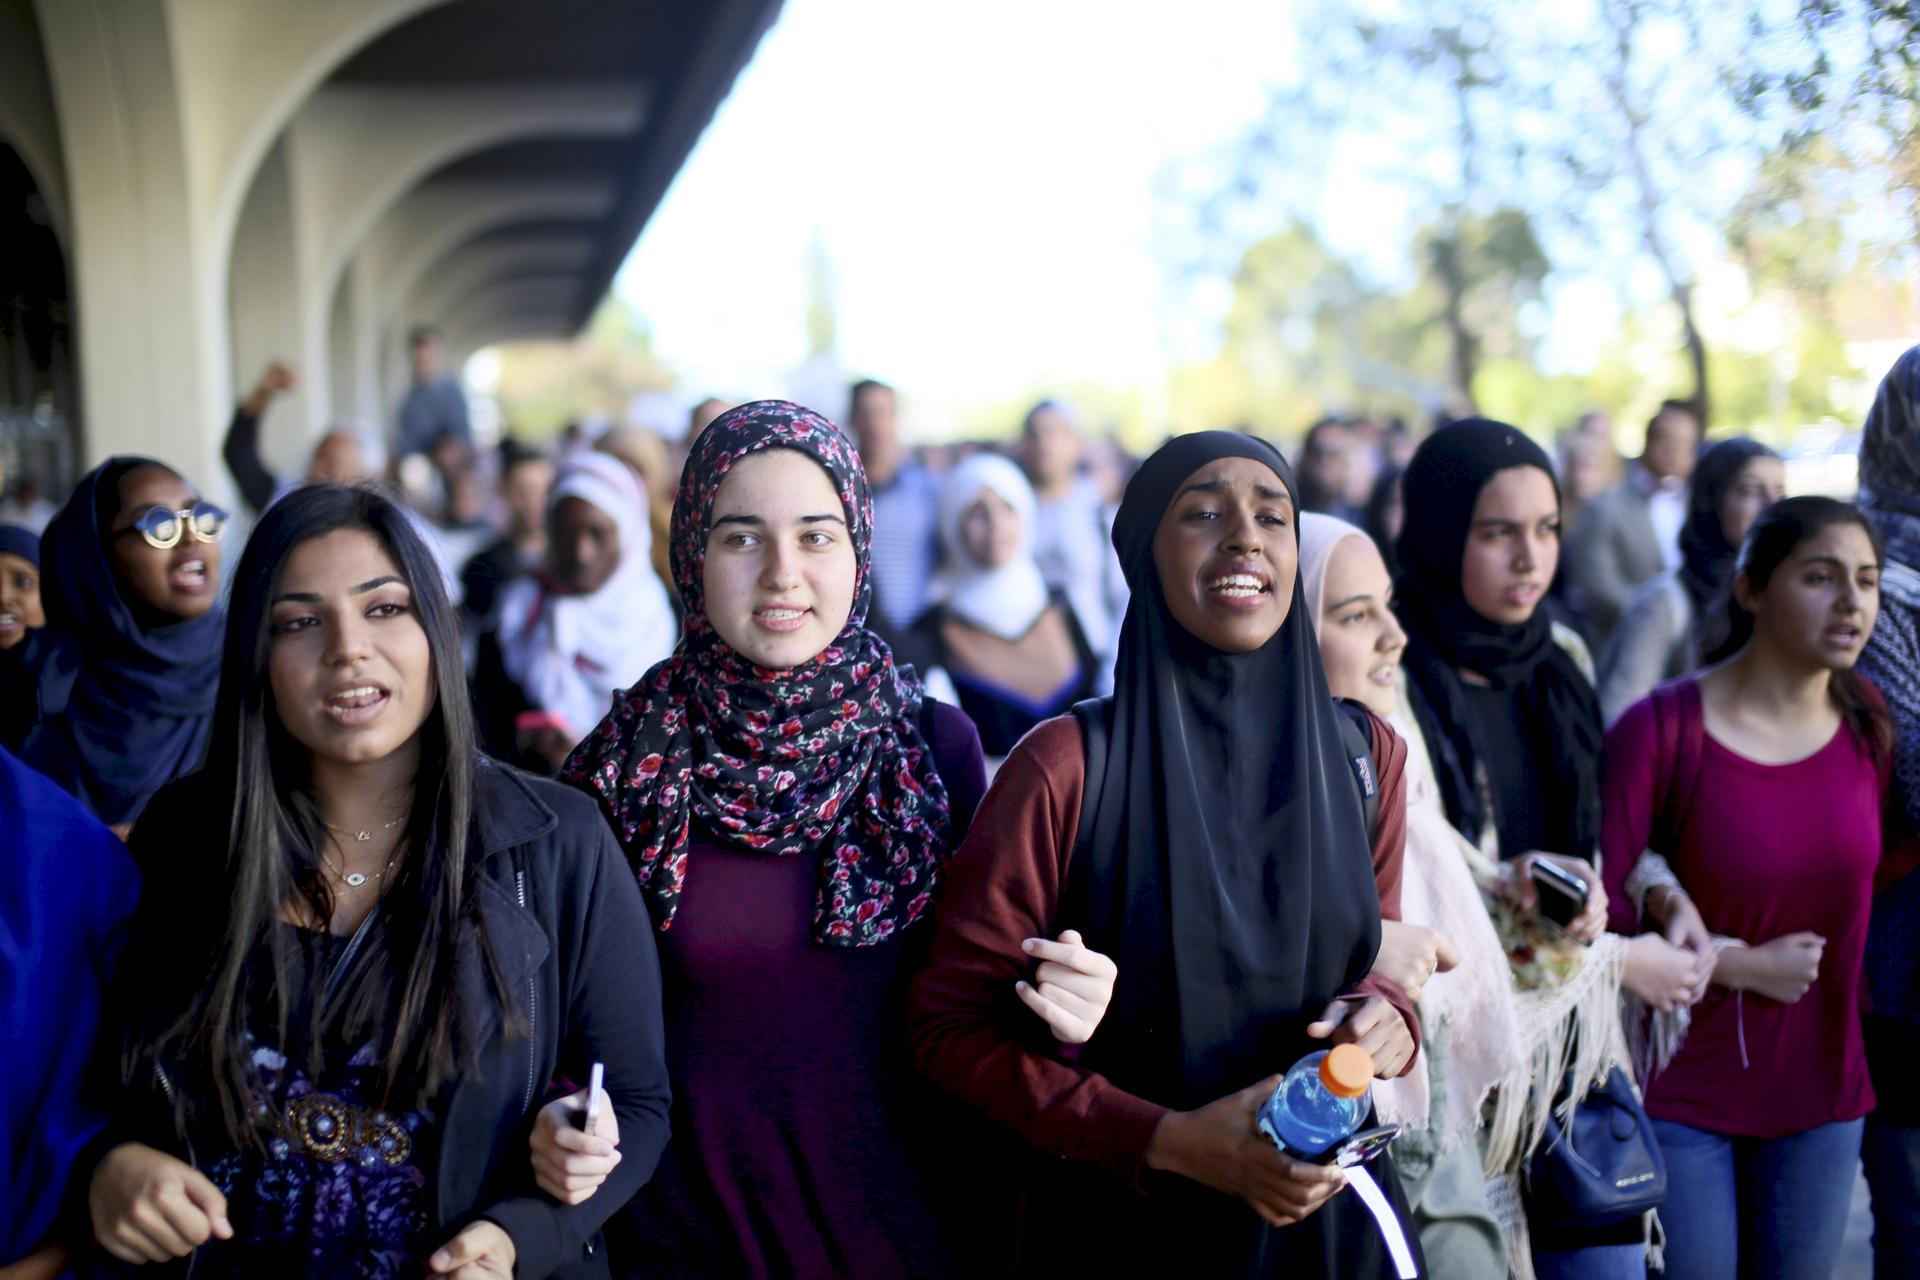 Students chant while marching at a rally against Islamophobia at San Diego State University in San Diego, California.